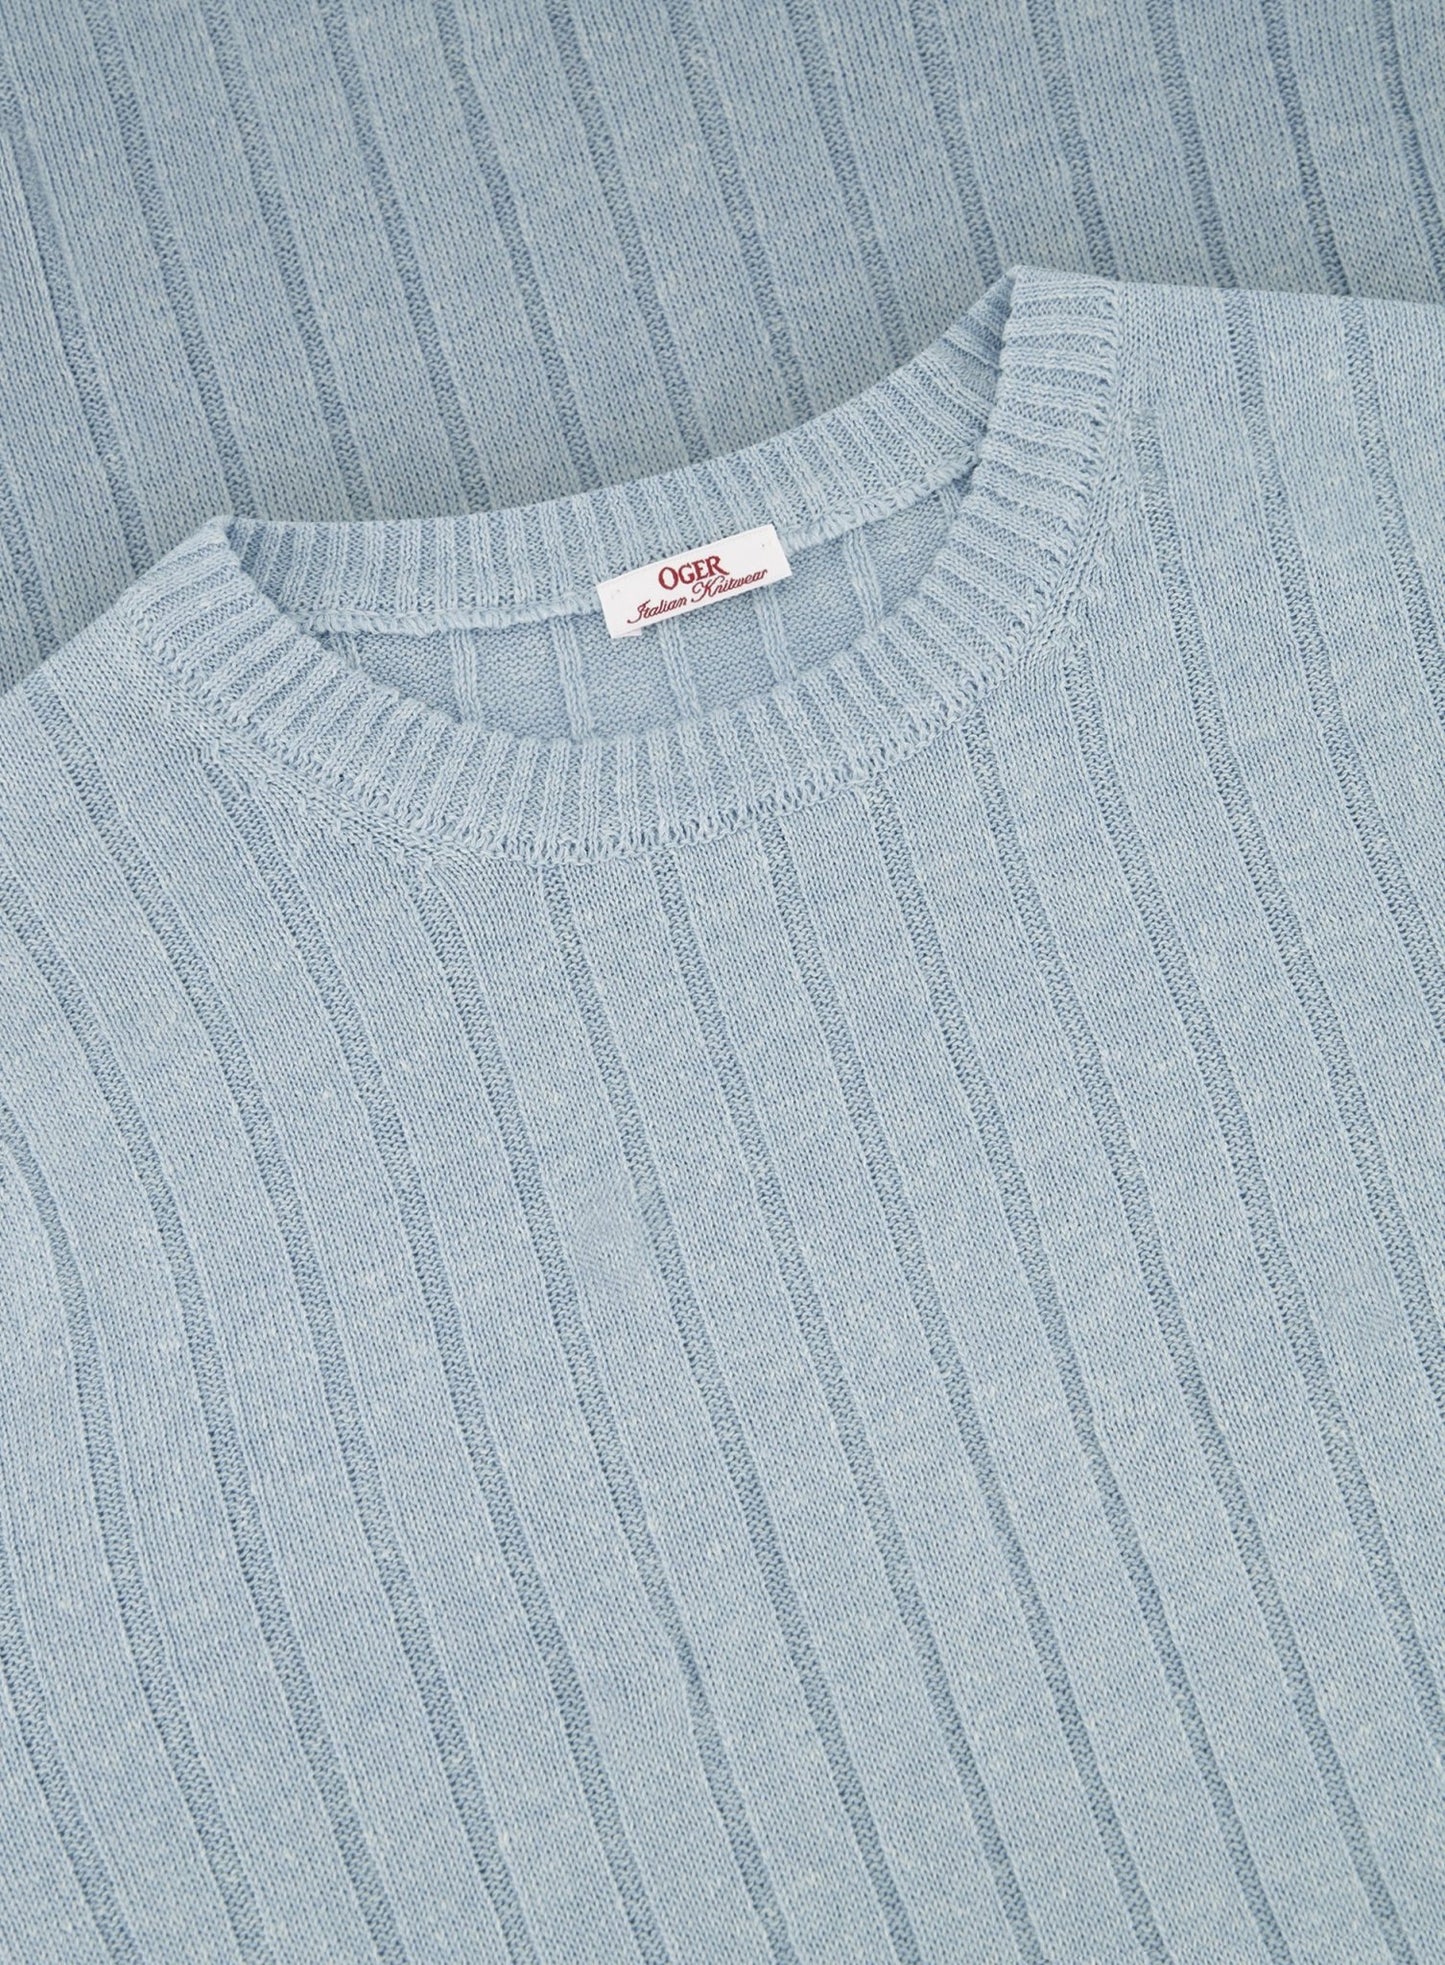 Ribbed t-shirt made of linen and cotton